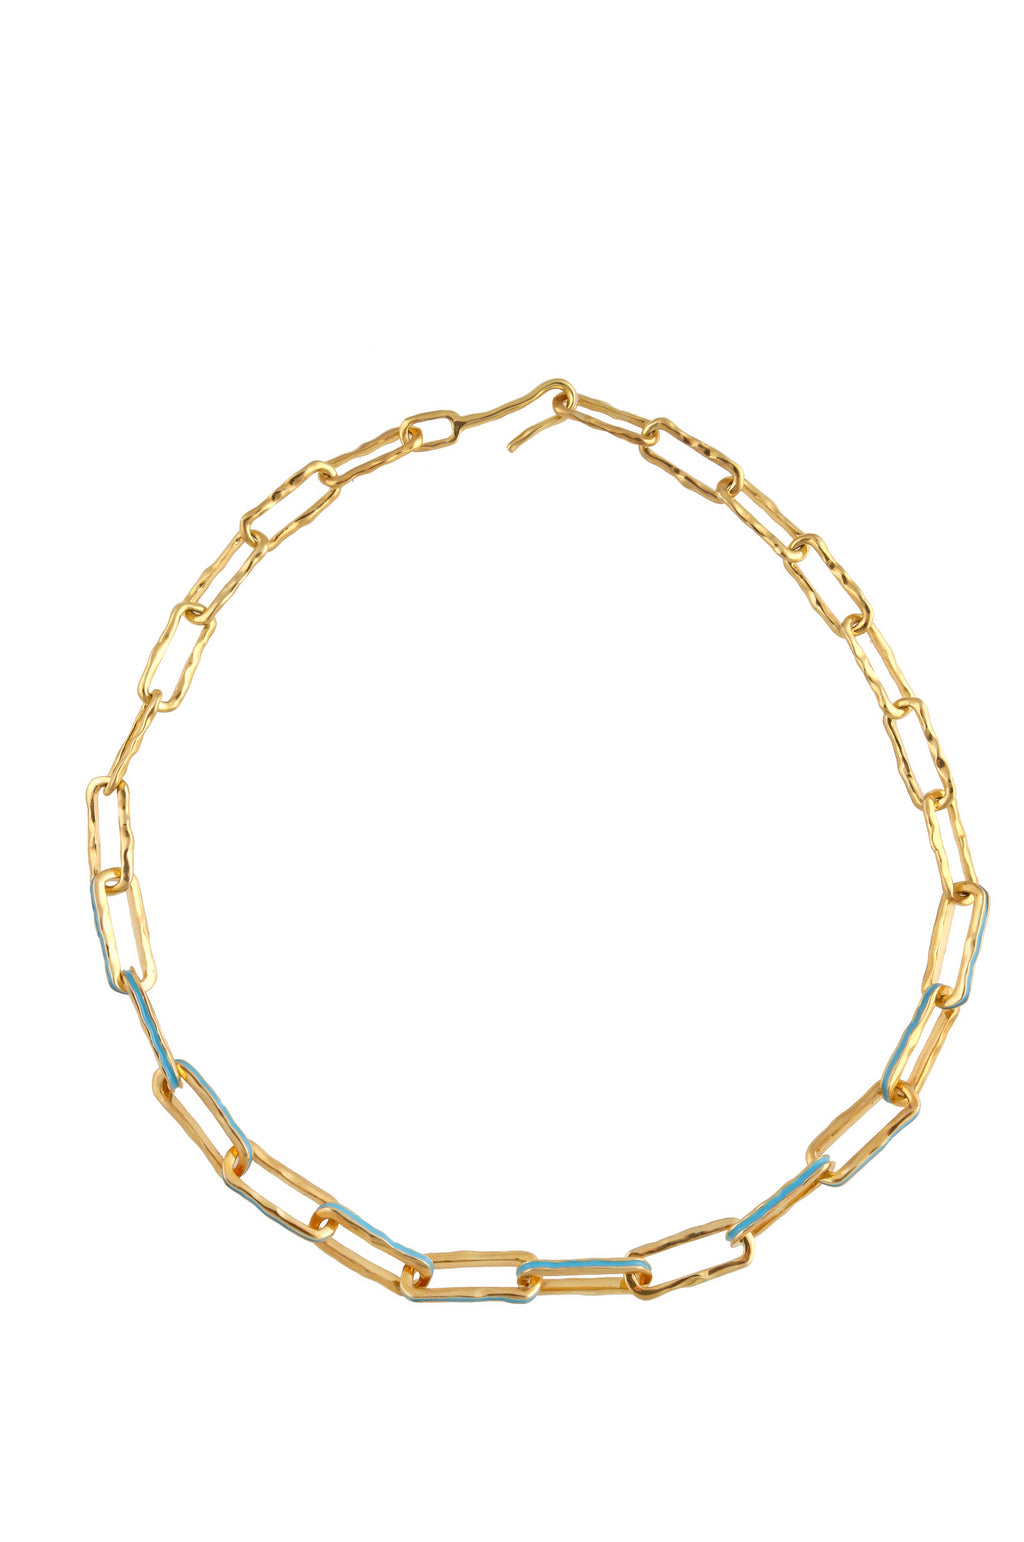 STATEMENT WAVE CHAIN NECKLACE WITH ENAMEL